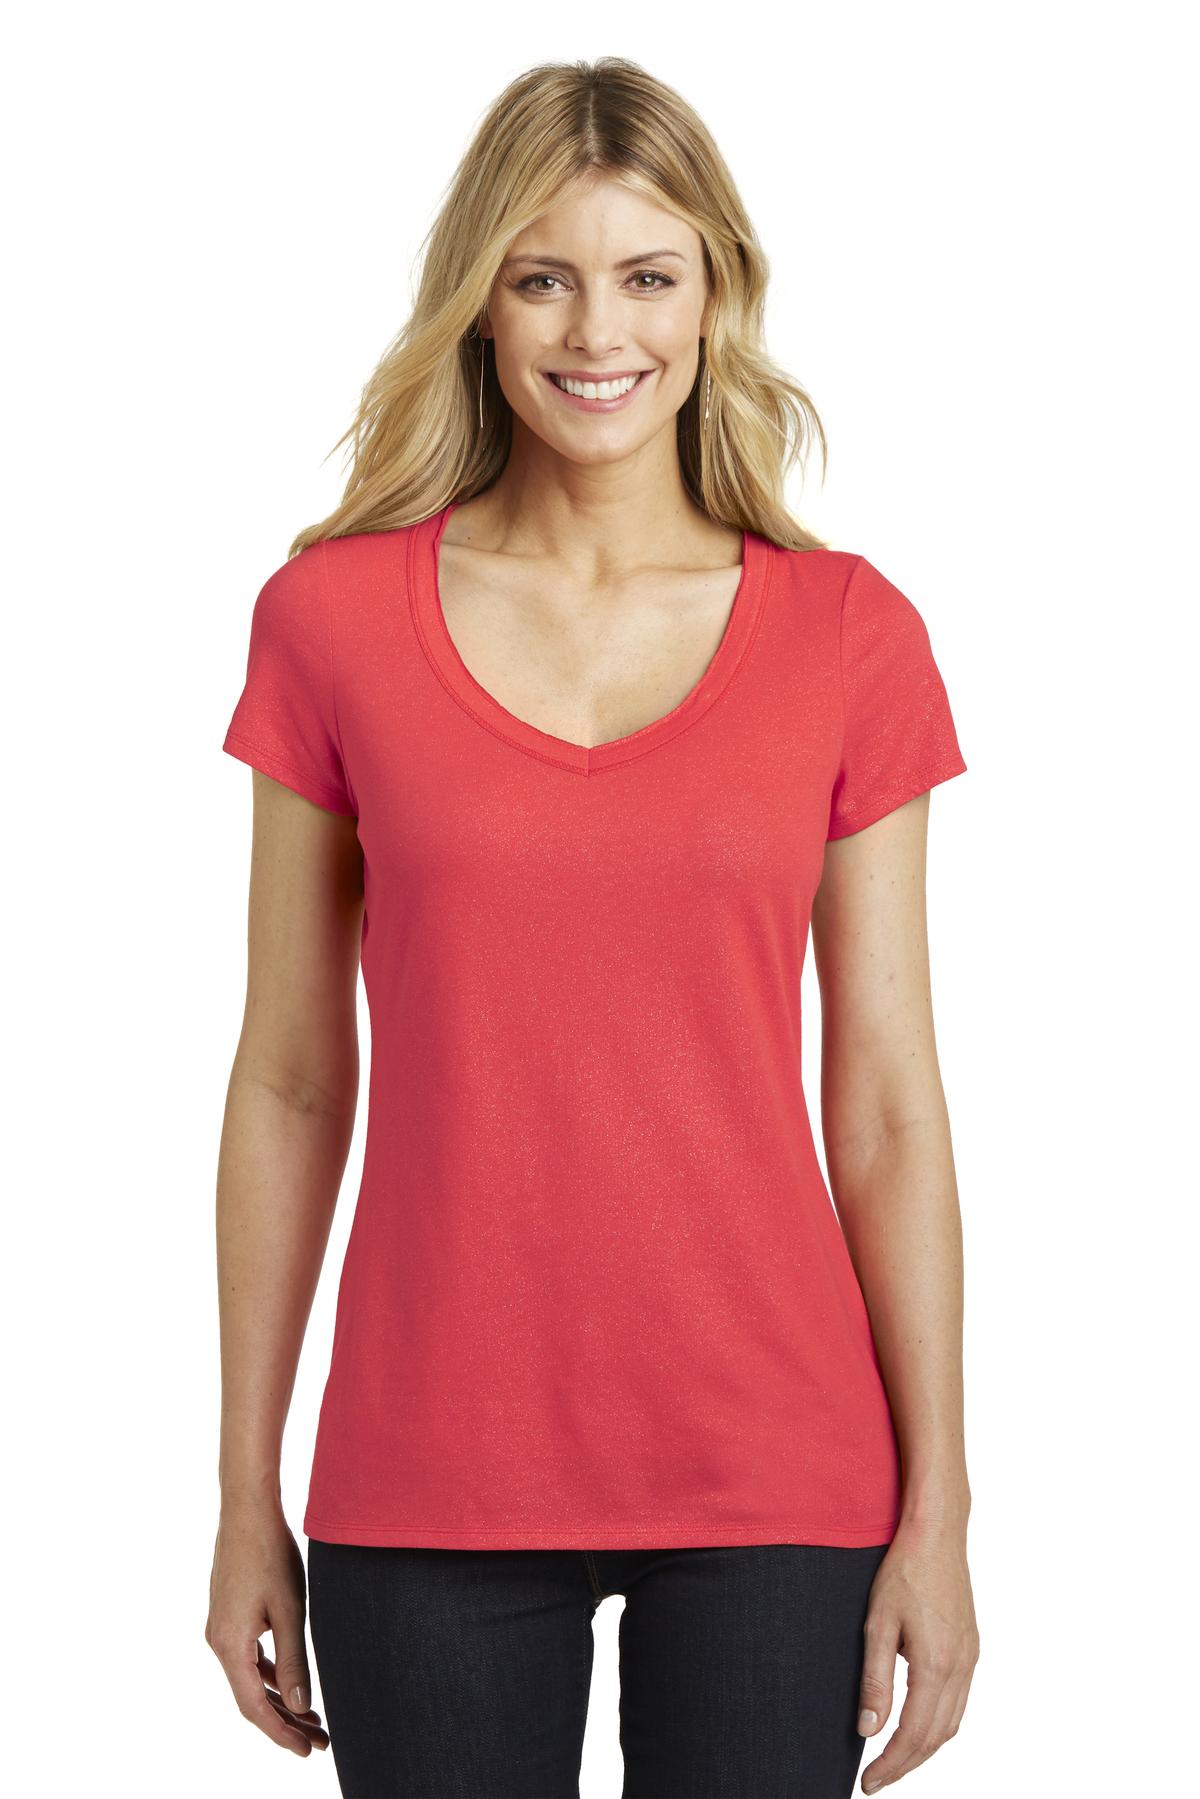 click to view Bright Coral